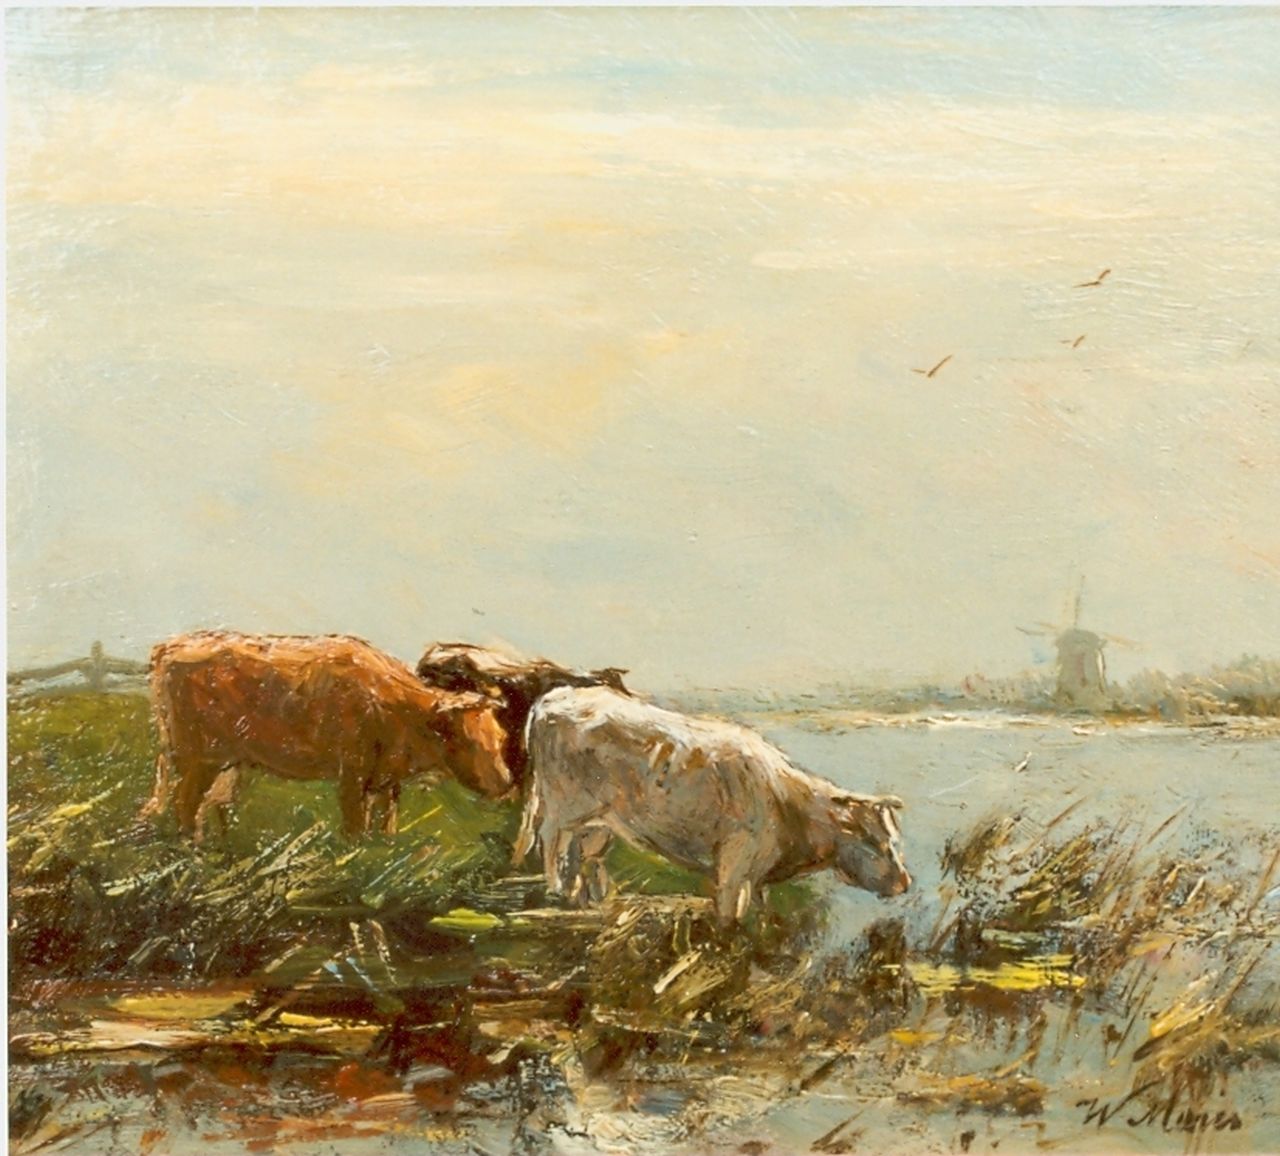 Maris W.  | Willem Maris, Cows on the riverbank, oil on panel 15.0 x 18.3 cm, signed l.r.